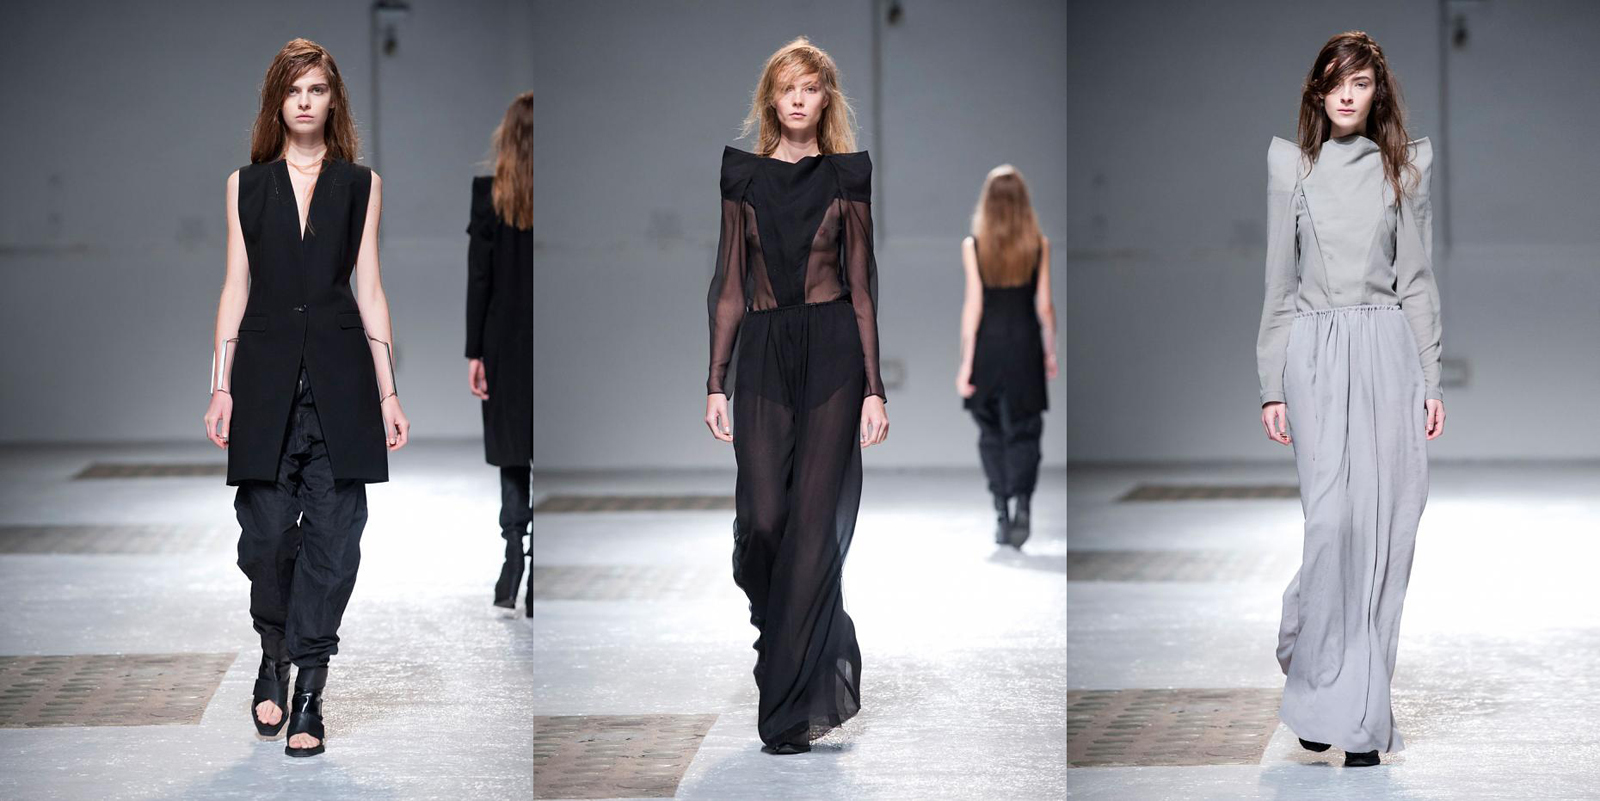 Nicolas Andreas Taralis - S/S 2013 | In search of the Missing Light